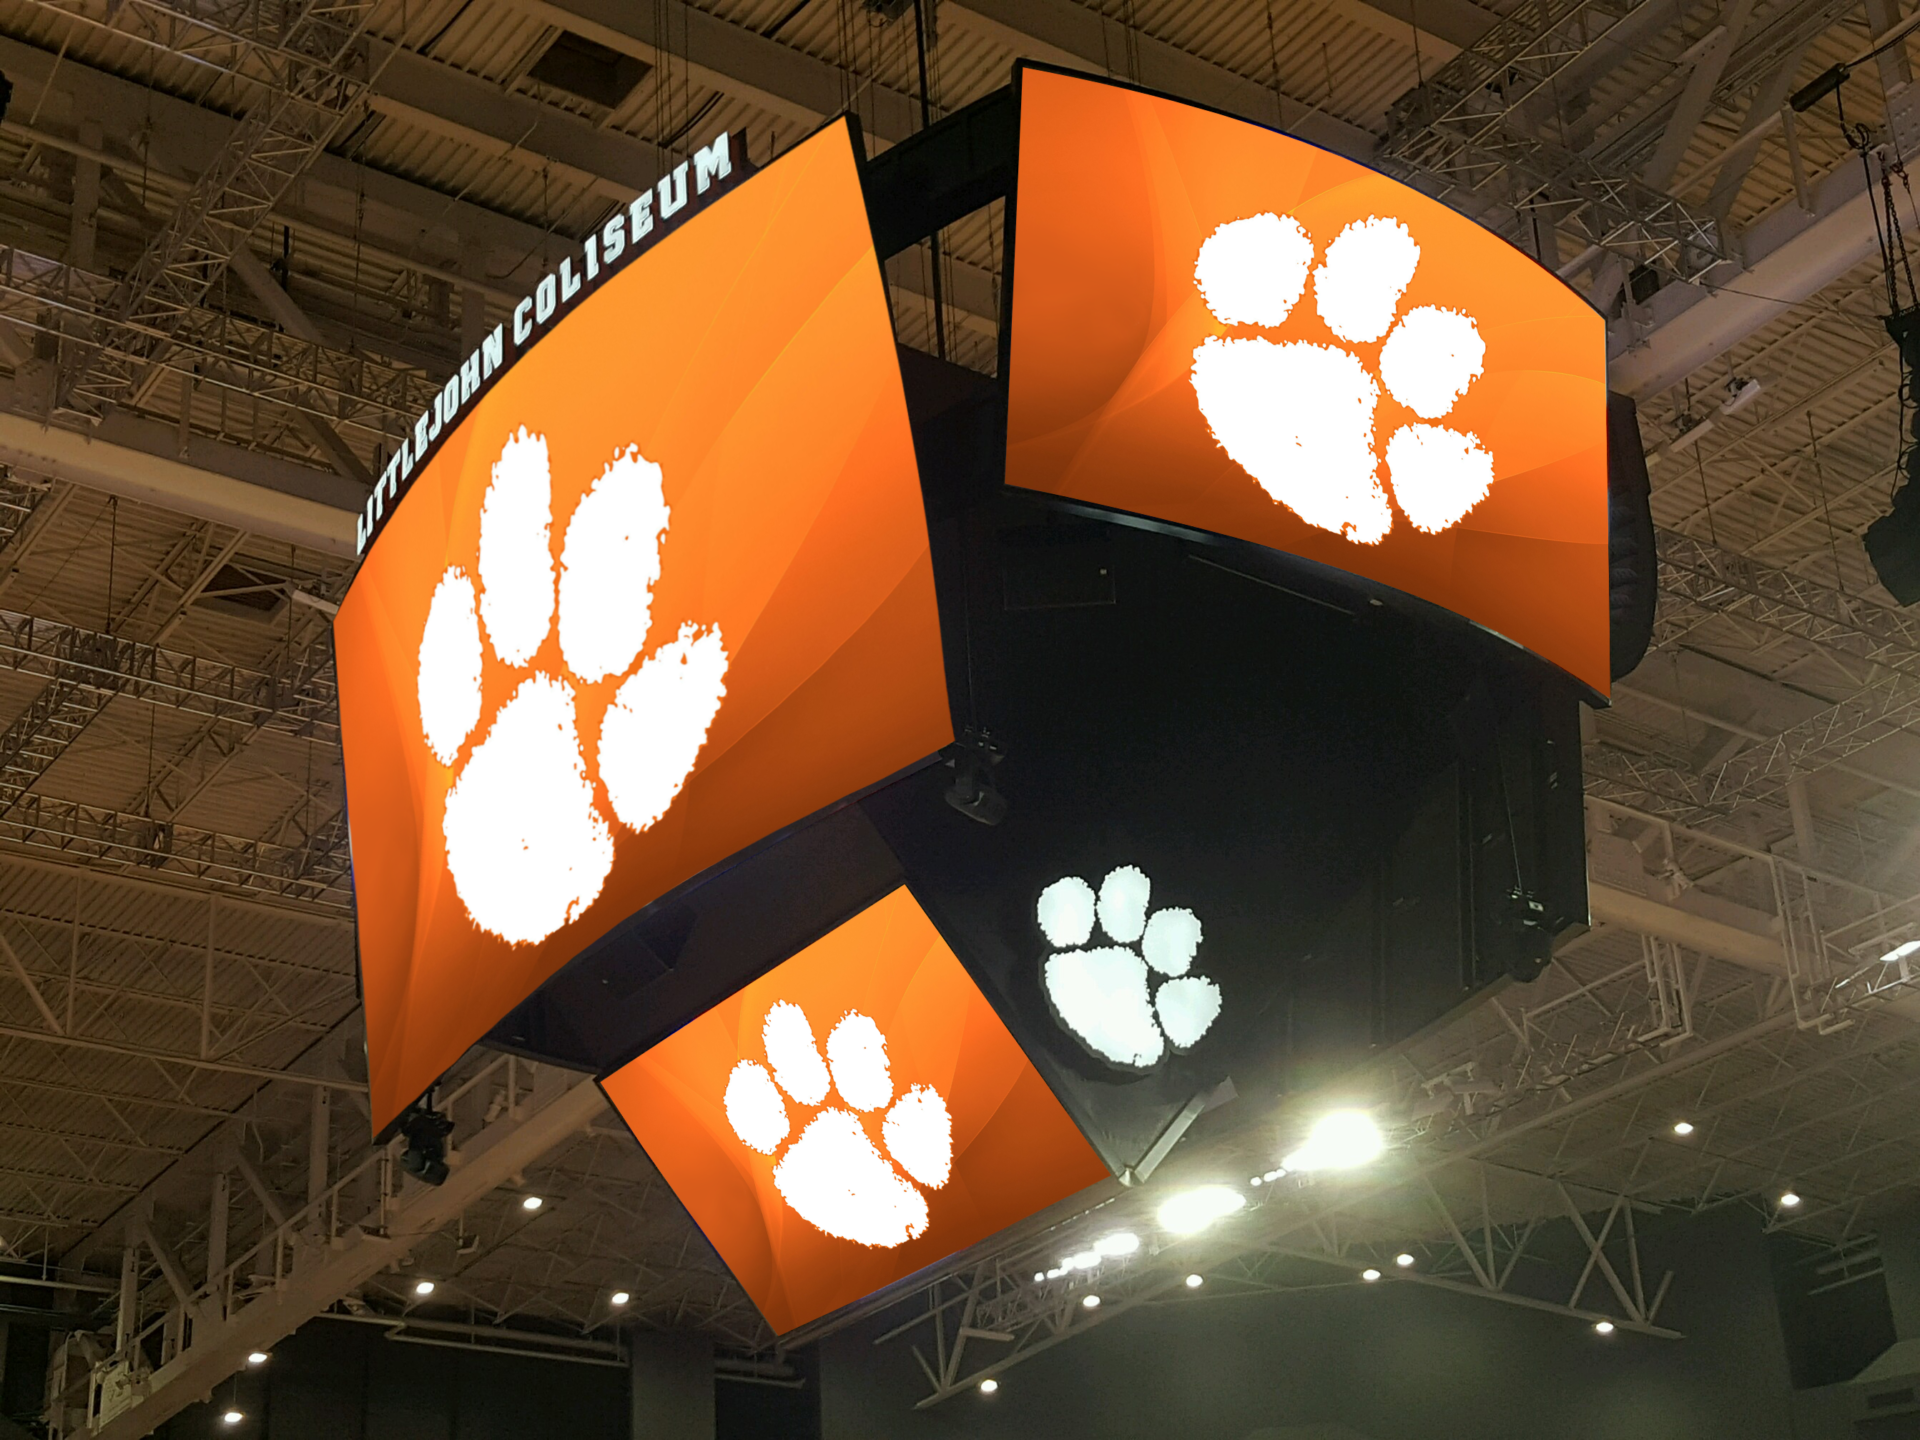 AJP, Anthony James Partners, AV Consulting, Center Hung, Centerhung, College Sports, College Basketball, ACC Coastal Division, LED Video Scoreboard, LED, LED Video, Scoreboard, Video Board, Boxcar, Box Car